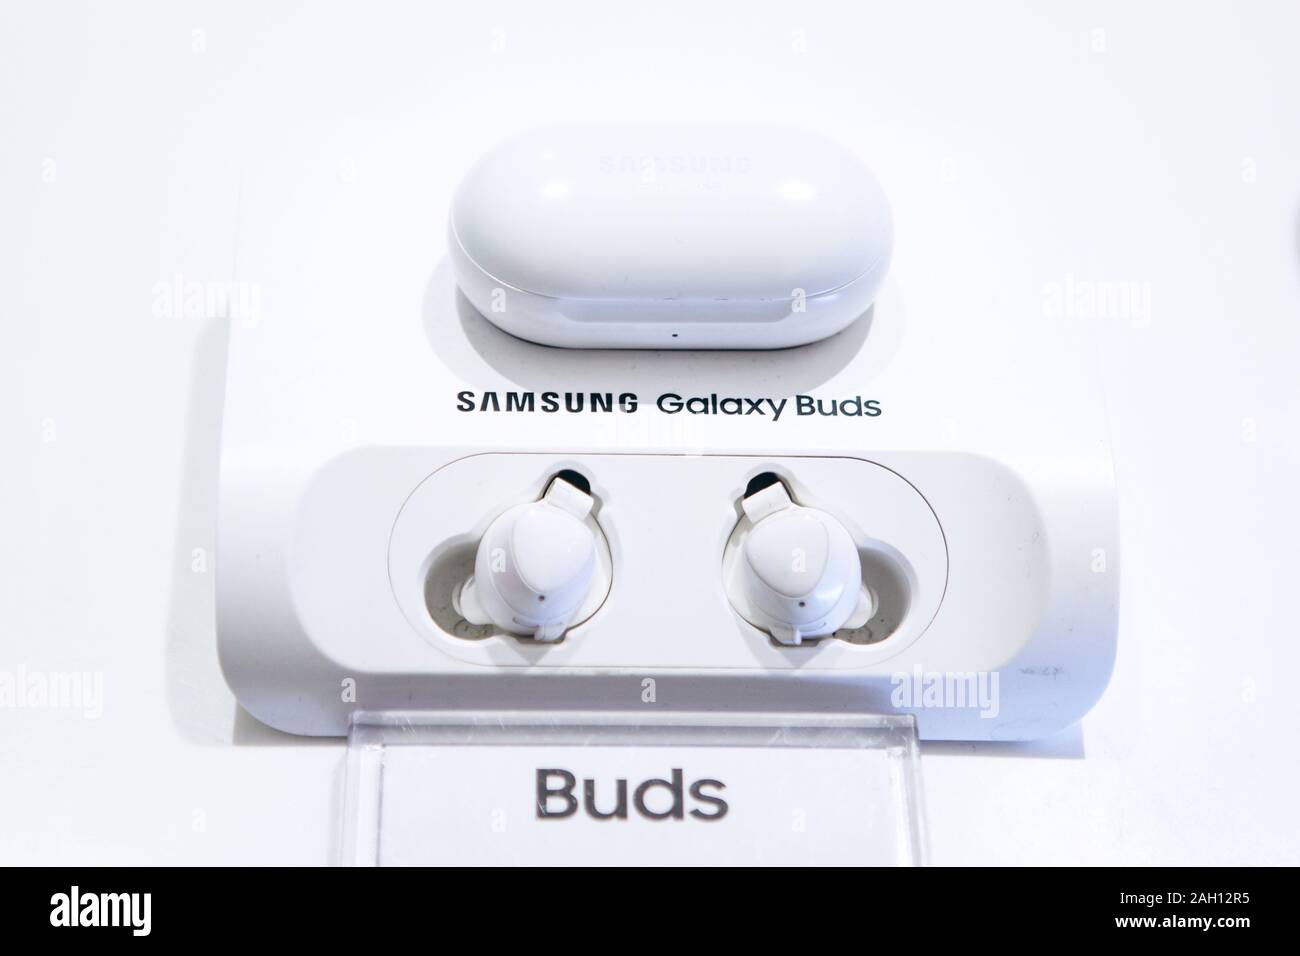 Turkey, Istanbul, December 20, 2019: New modern Samsung Galaxy Buds sale in the official Samsung store. Stock Photo